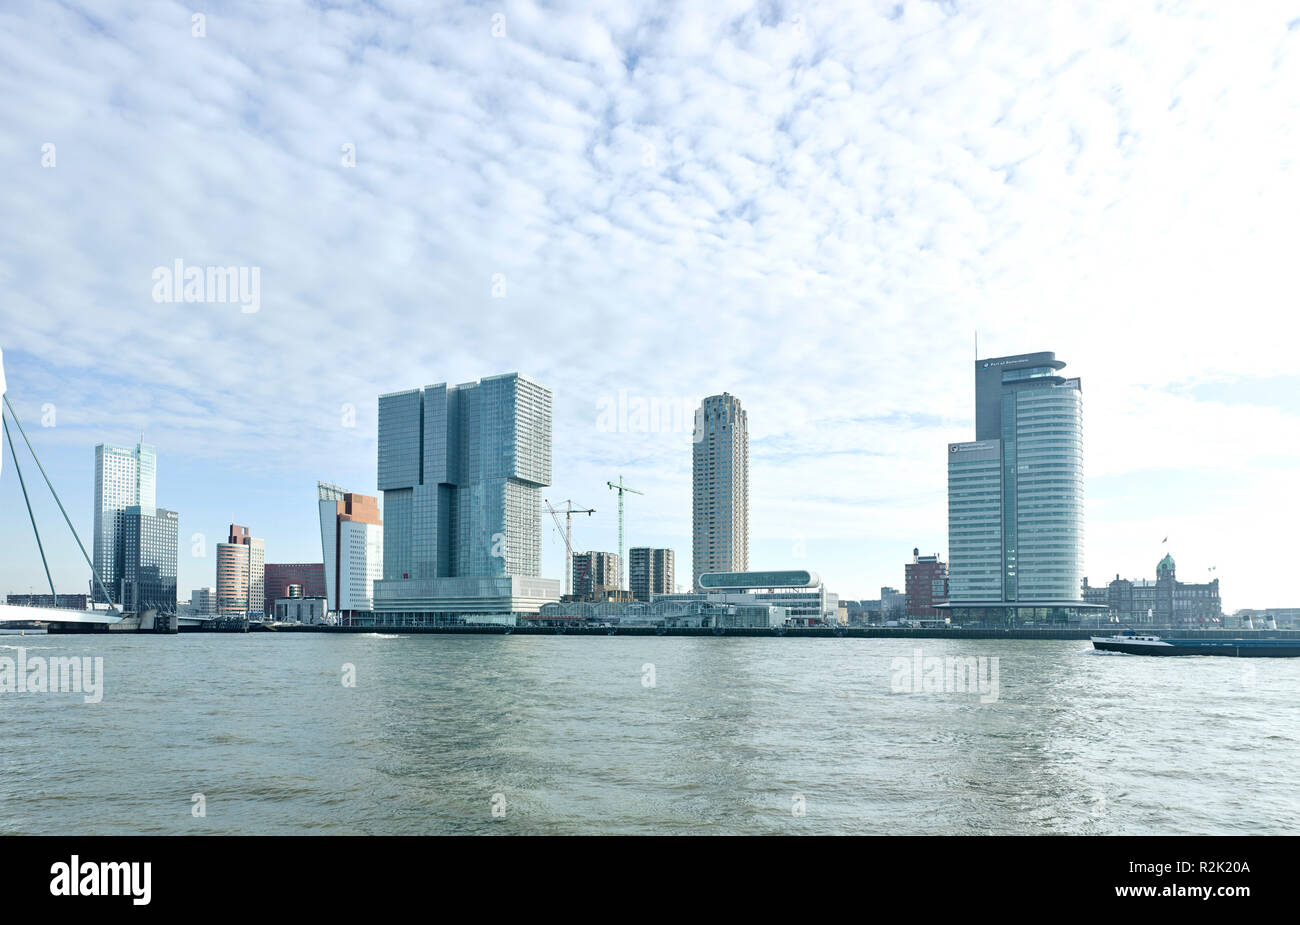 Rotterdam, district 'Head of South', seen from the Veerhaven, with the Erasmus Bridge (Ben van Berkel 1992-1997), and the Rotterdam (OMA, 2002-2014), the largest building of Netherlands, to the right the tower New Orleans (Alvaro Siza , 2008-2013), highest residential tower of Netherlands and double tower World Port Center (Norman Foster, 1997-2003) Stock Photo